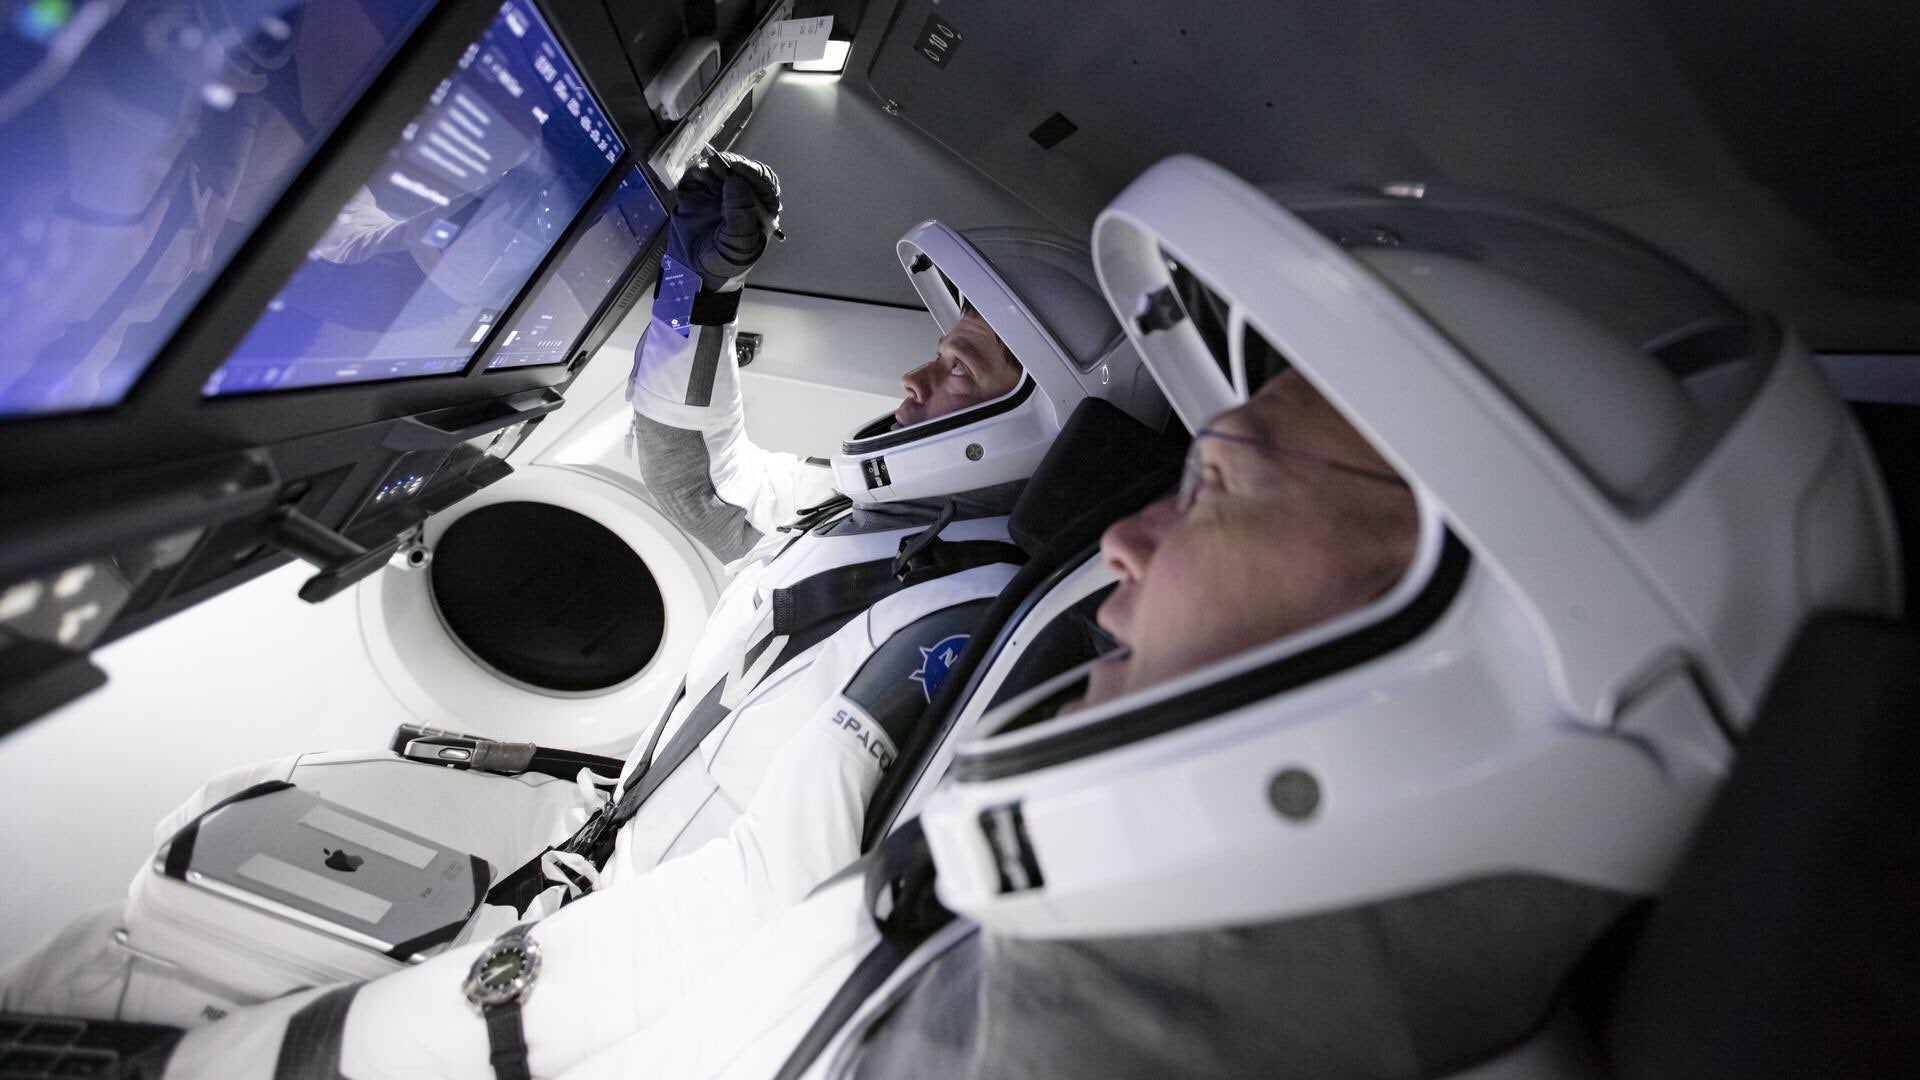 NASA Astronauts complete SpaceX simulations to prepare for first flight aboard Dragon